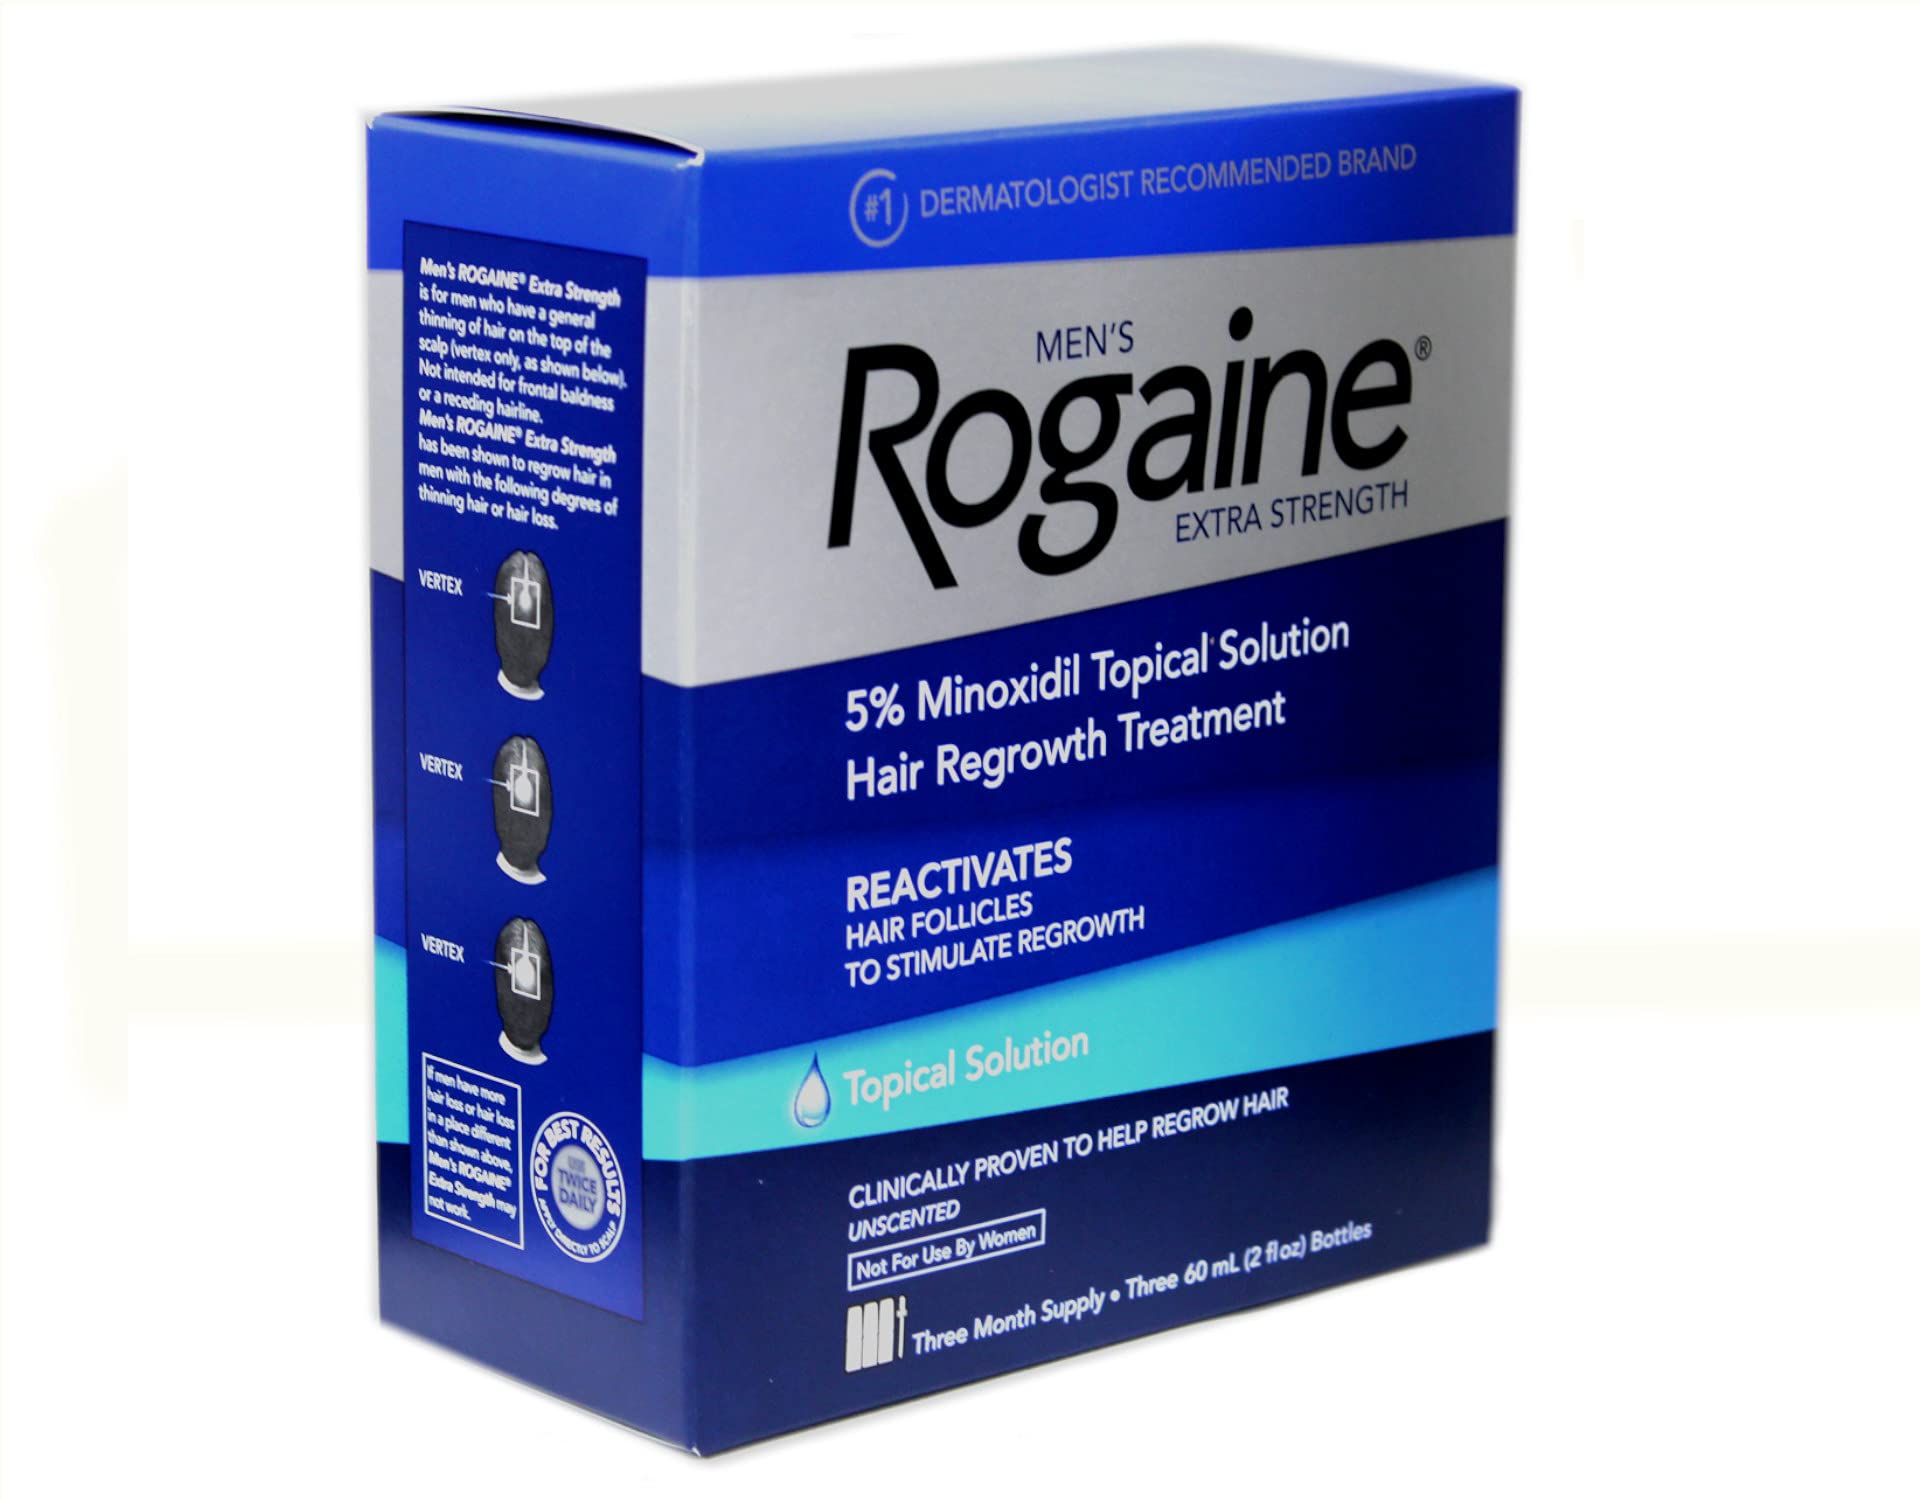 Men's Rogaine Hair Regrowth Treatment, Extra Strength - 3 Month Supply